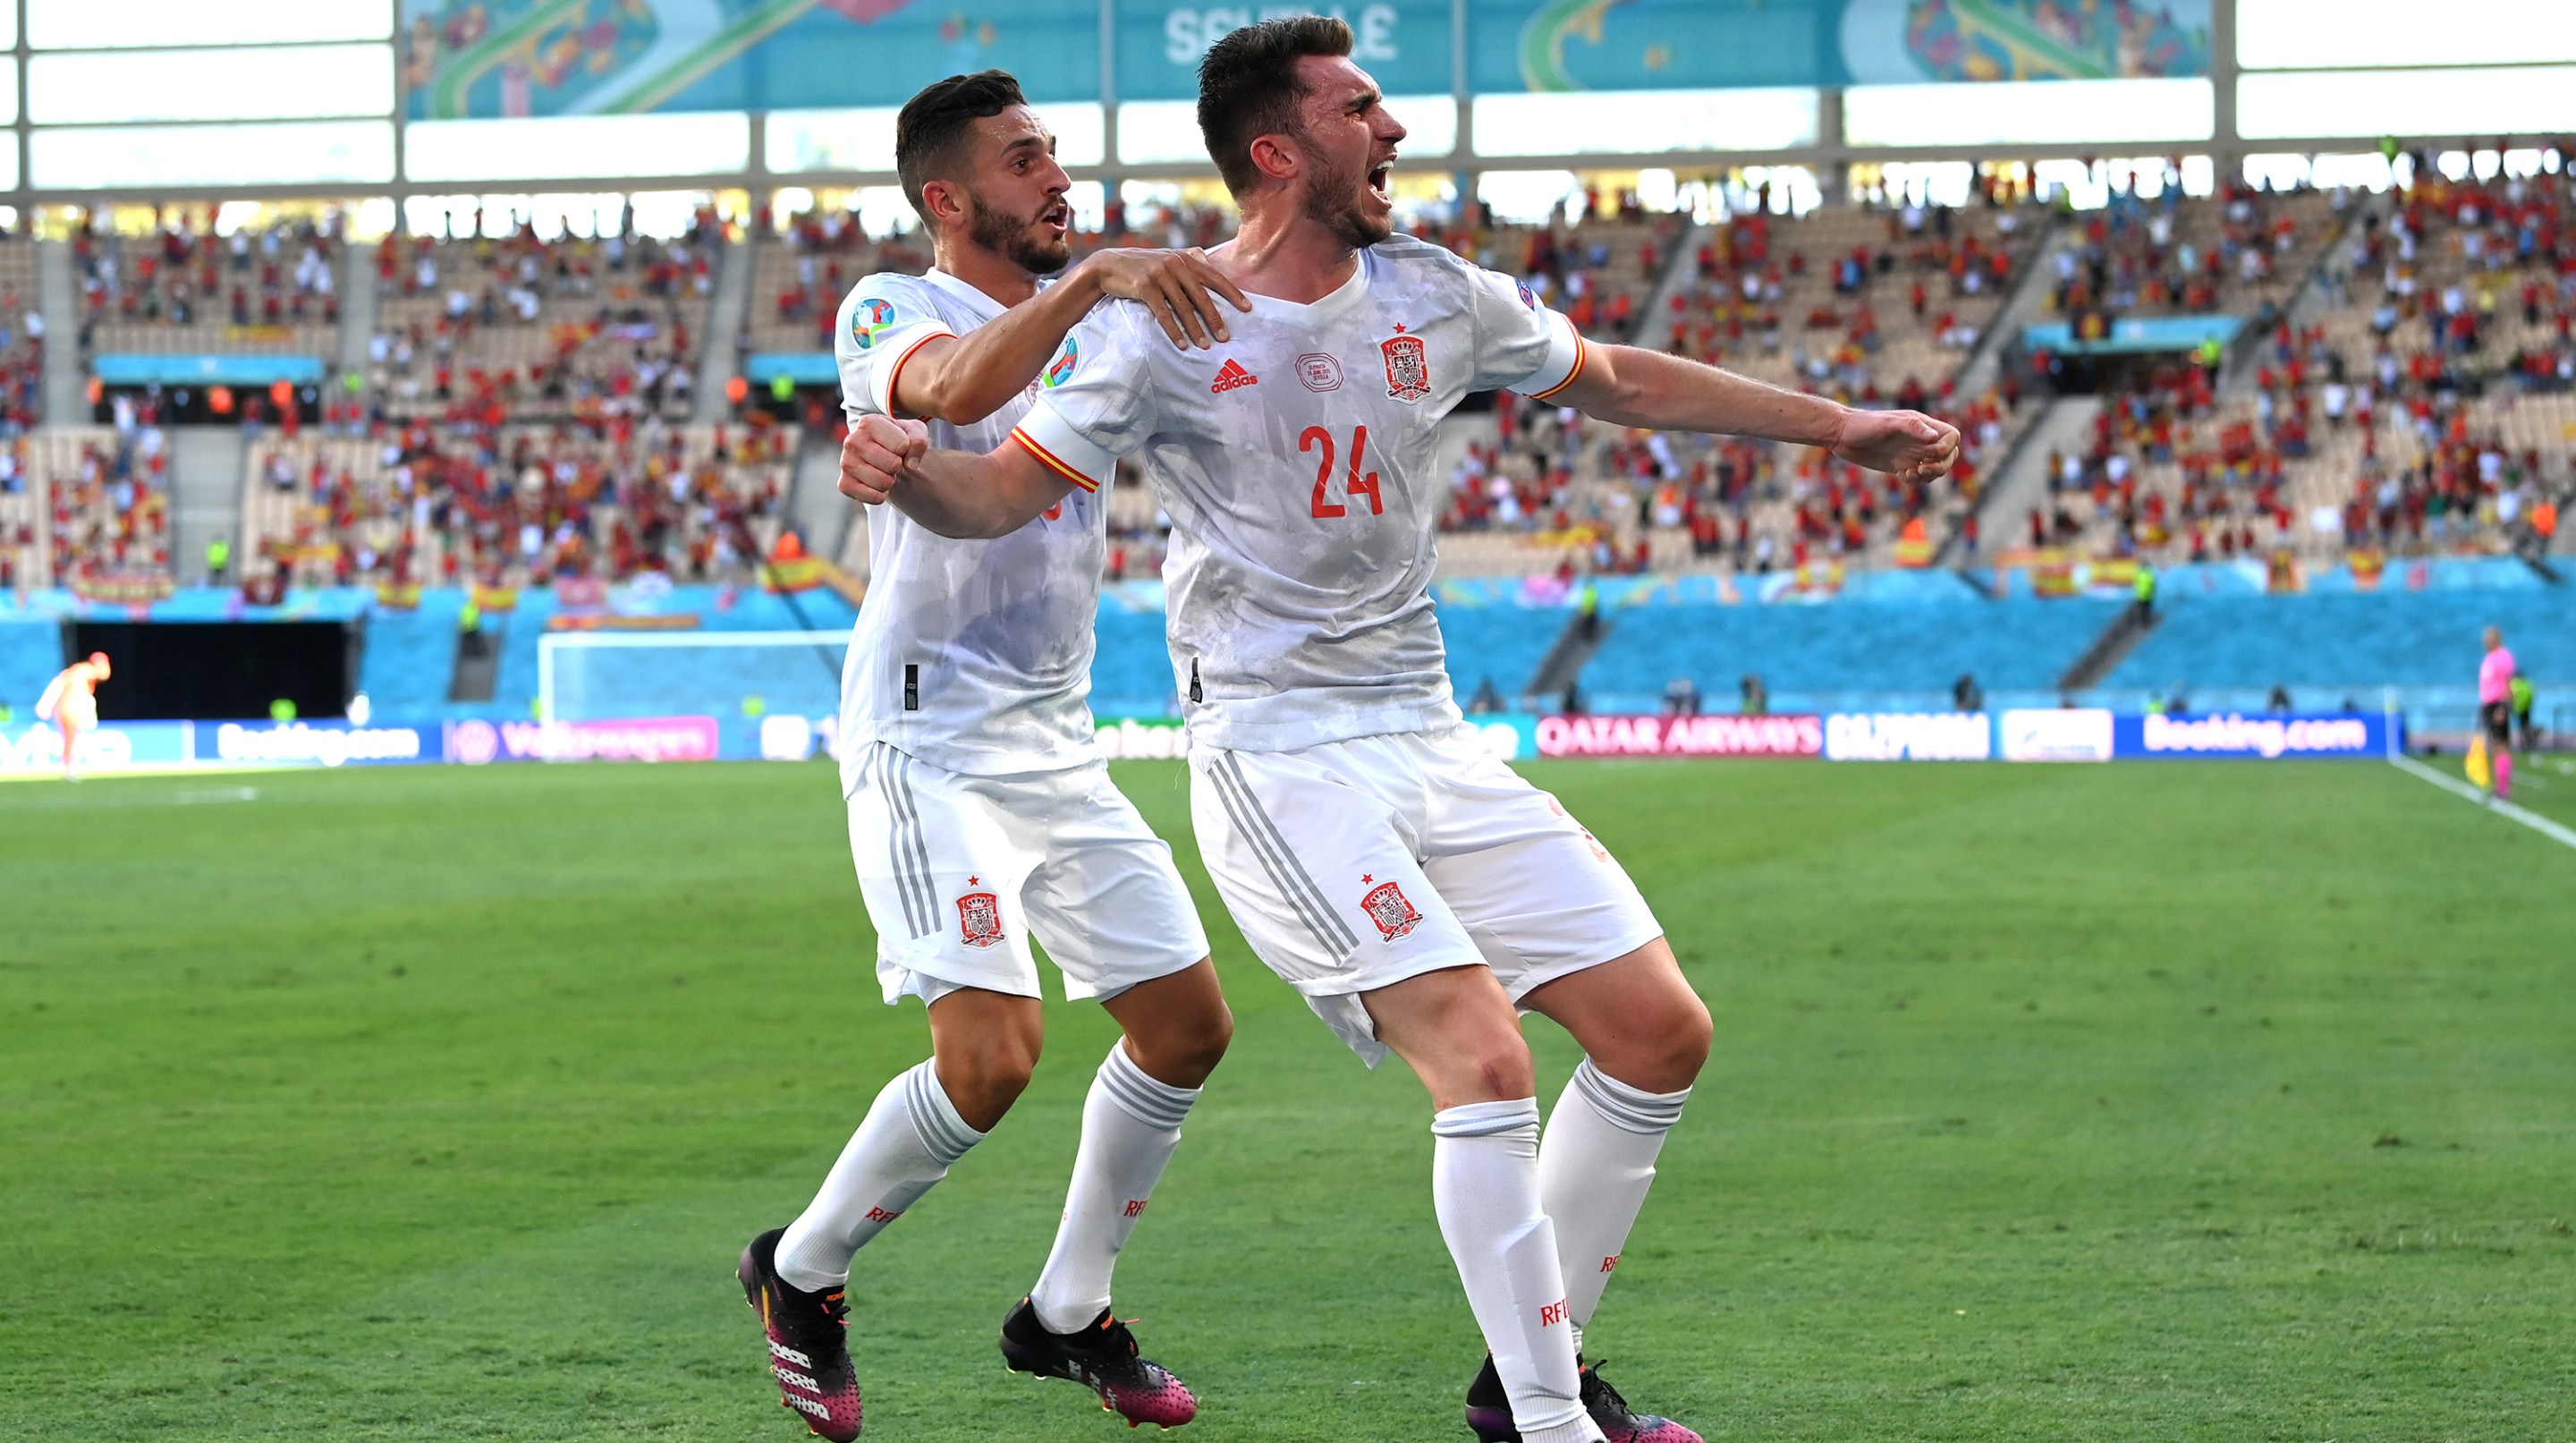 Aymeric Laporte of Spain celebrates with Koke after scoring their side's second goal during the UEFA Euro 2020 Championship Group E match between Slovakia and Spain at Estadio La Cartuja on June 23, 2021 in Seville, Spain.